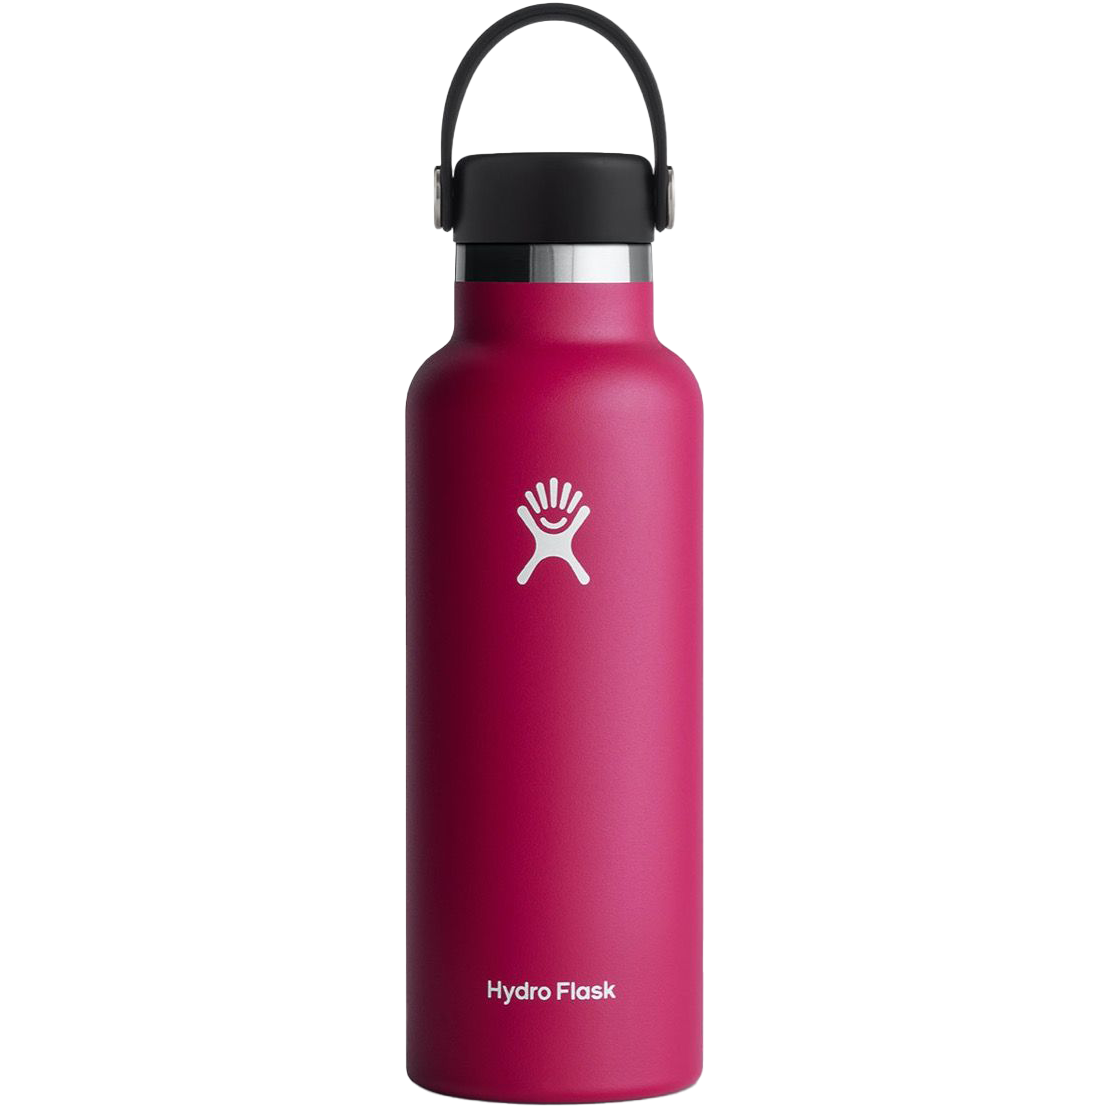 Owala FreeSip Insulated Stainless Steel Water Bottle with Straw, BPA-Free  Sports Water Bottle, Great for Travel, 32 Oz, Denim